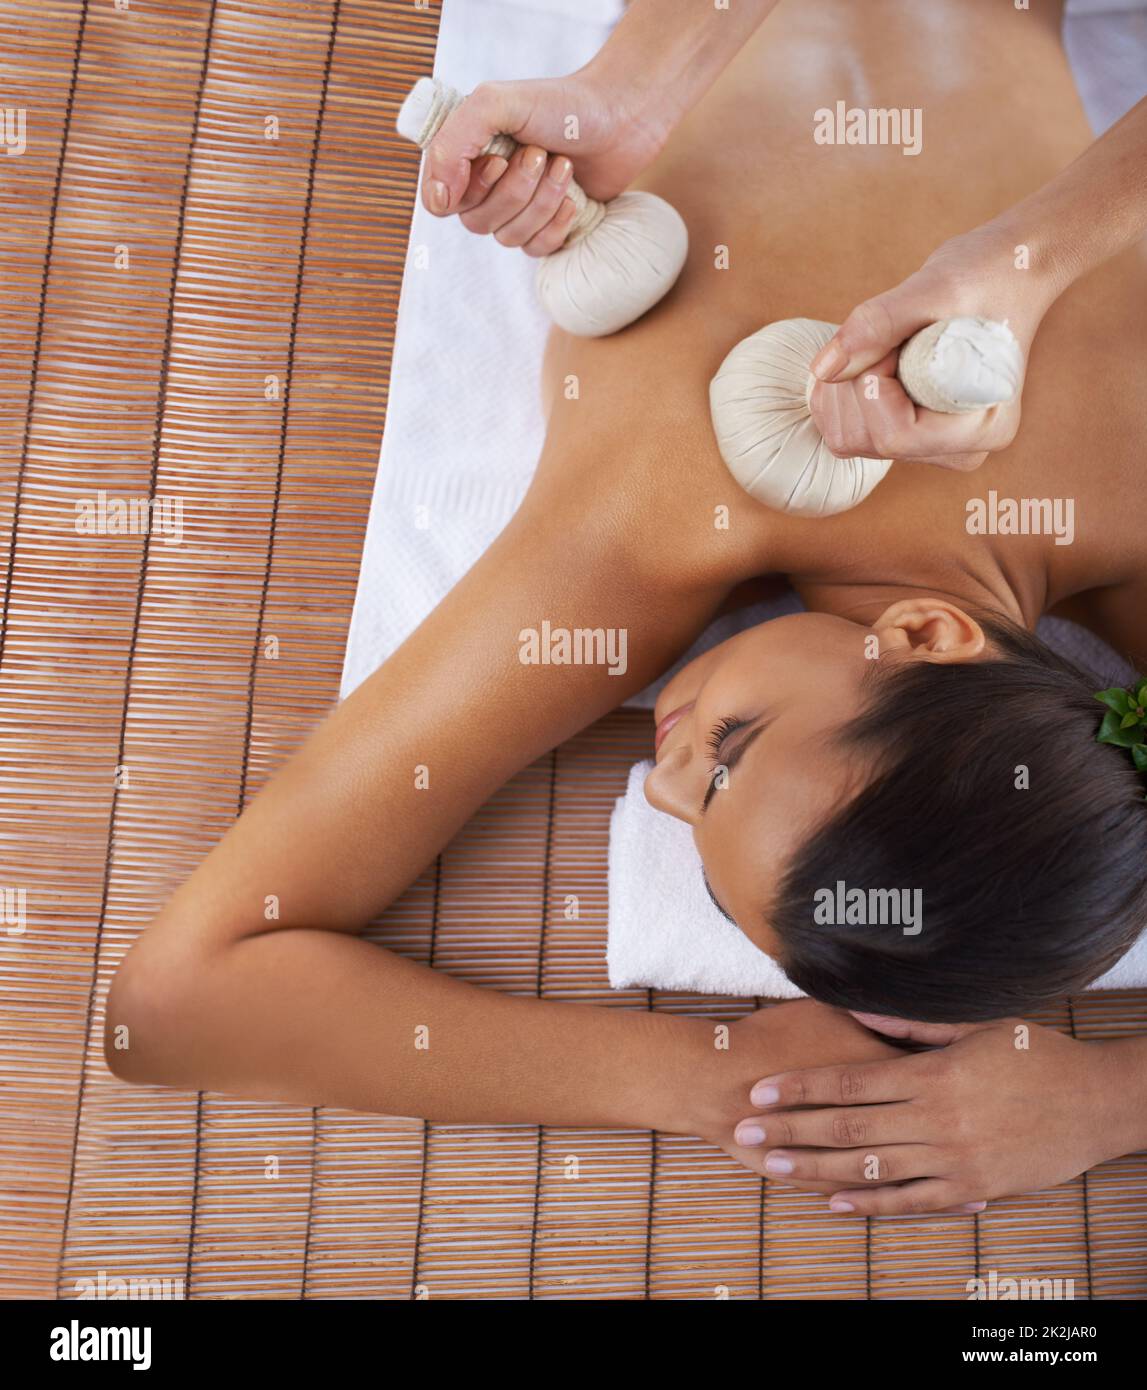 Enjoy a day of pampering. A young woman lying in a health spa. Stock Photo